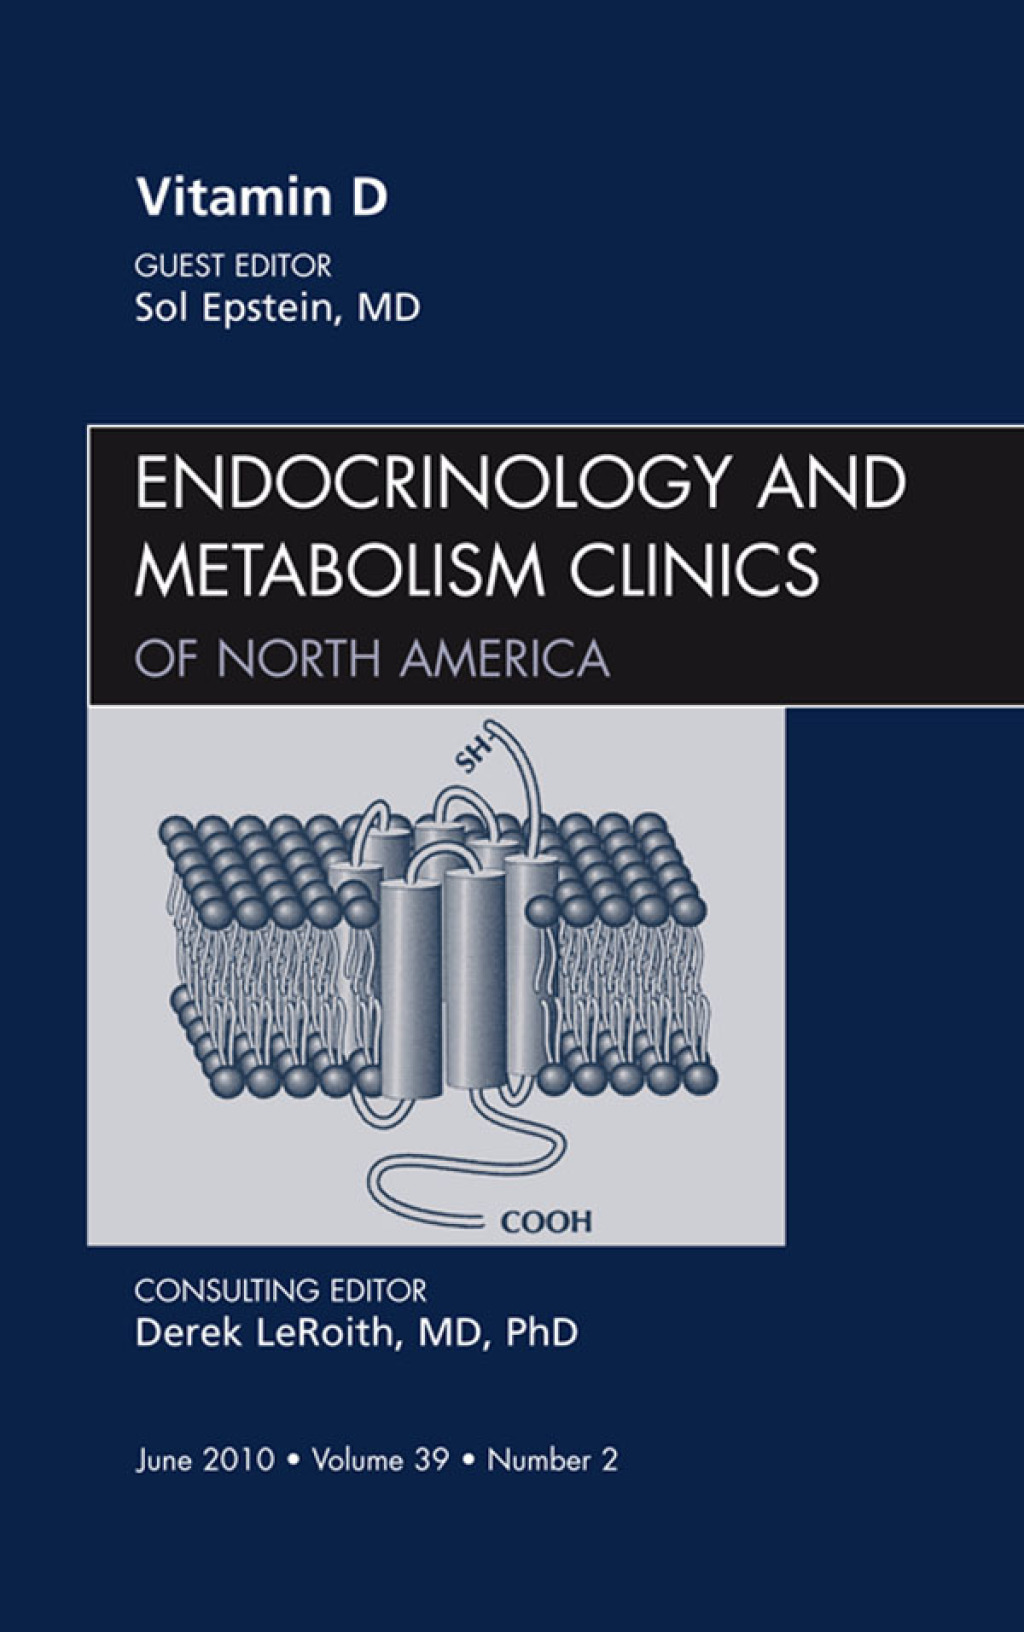 Vitamin D  An Issue of Endocrinology and Metabolism Clinics of North America  E-Book (eBook) - Sol Epstein